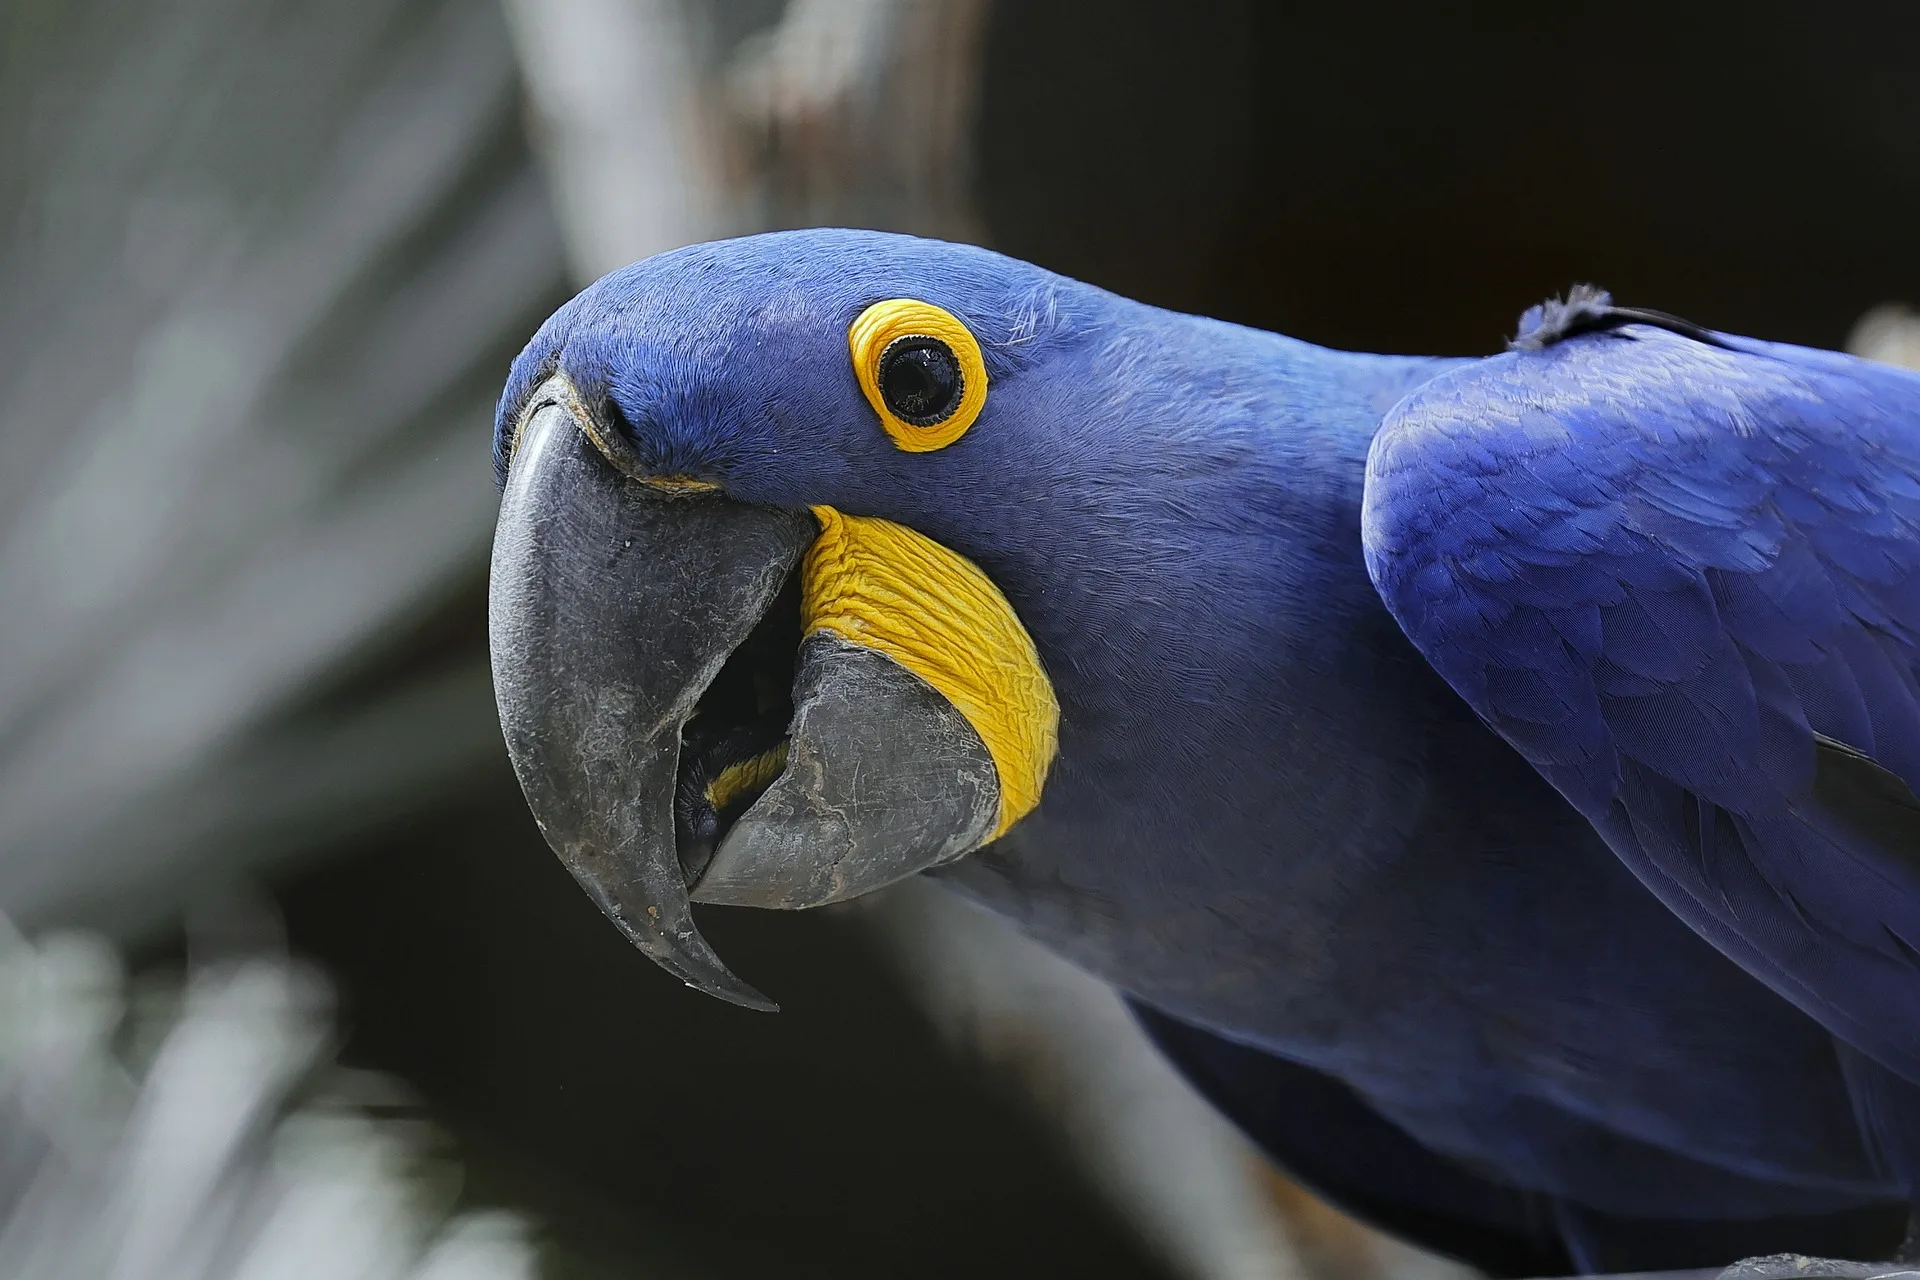 blue perroquet of the hyacinth macaw breed